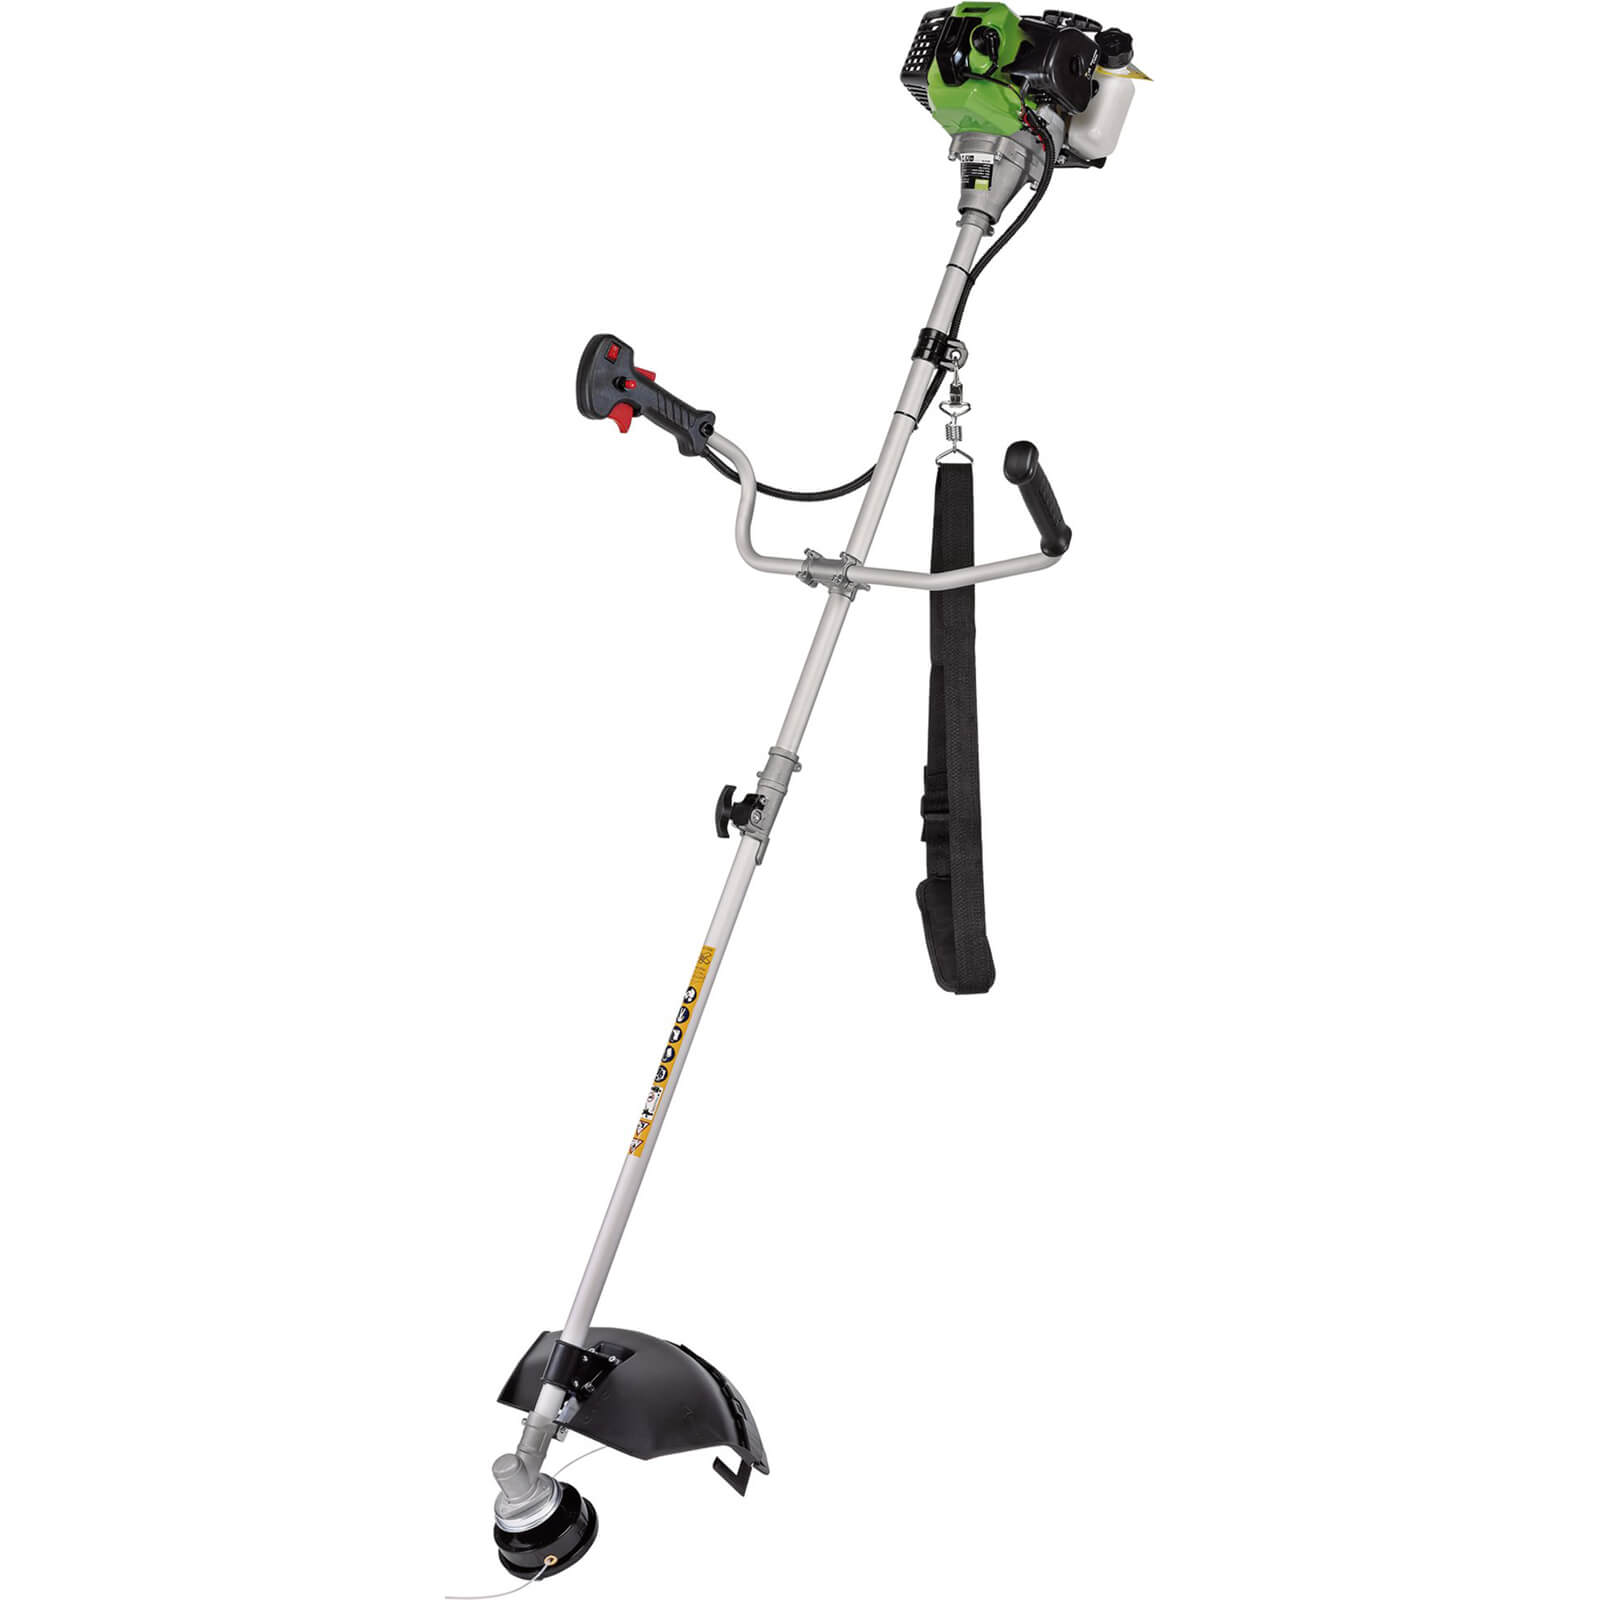 Image of Draper GTP34 Petrol Brush Cutter and Grass Trimmer